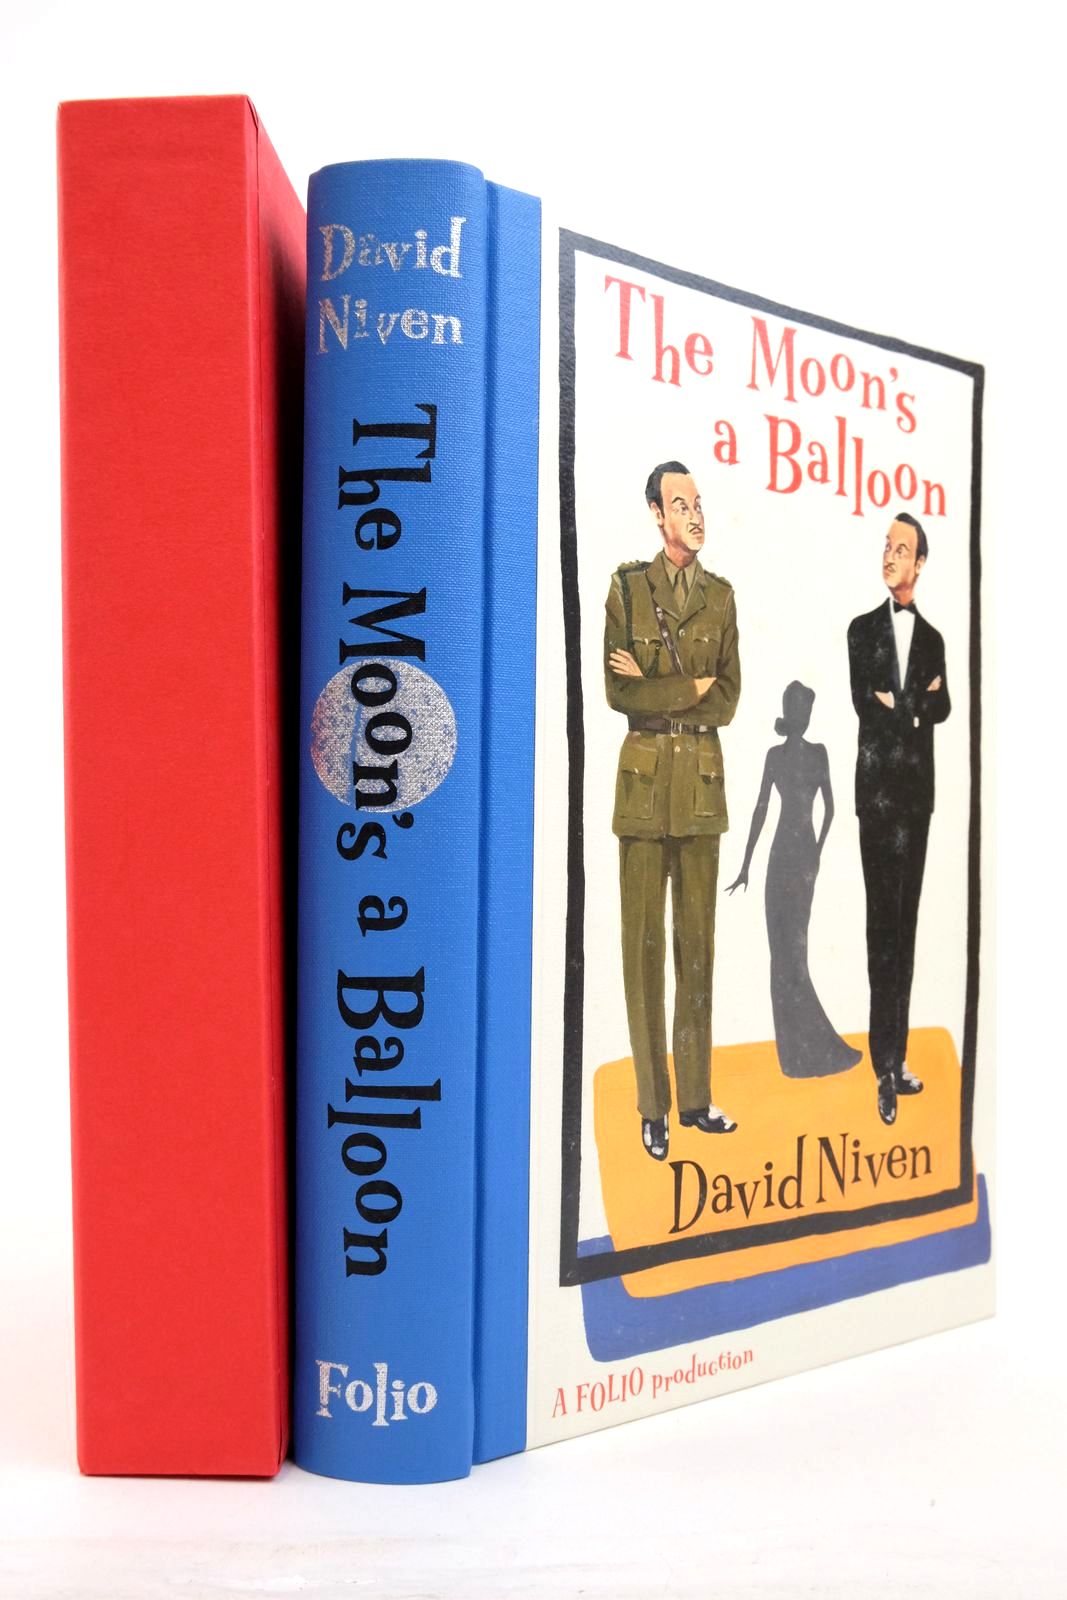 Photo of THE MOON'S A BALLOON written by Niven, David
French, Philip published by Folio Society (STOCK CODE: 2137833)  for sale by Stella & Rose's Books